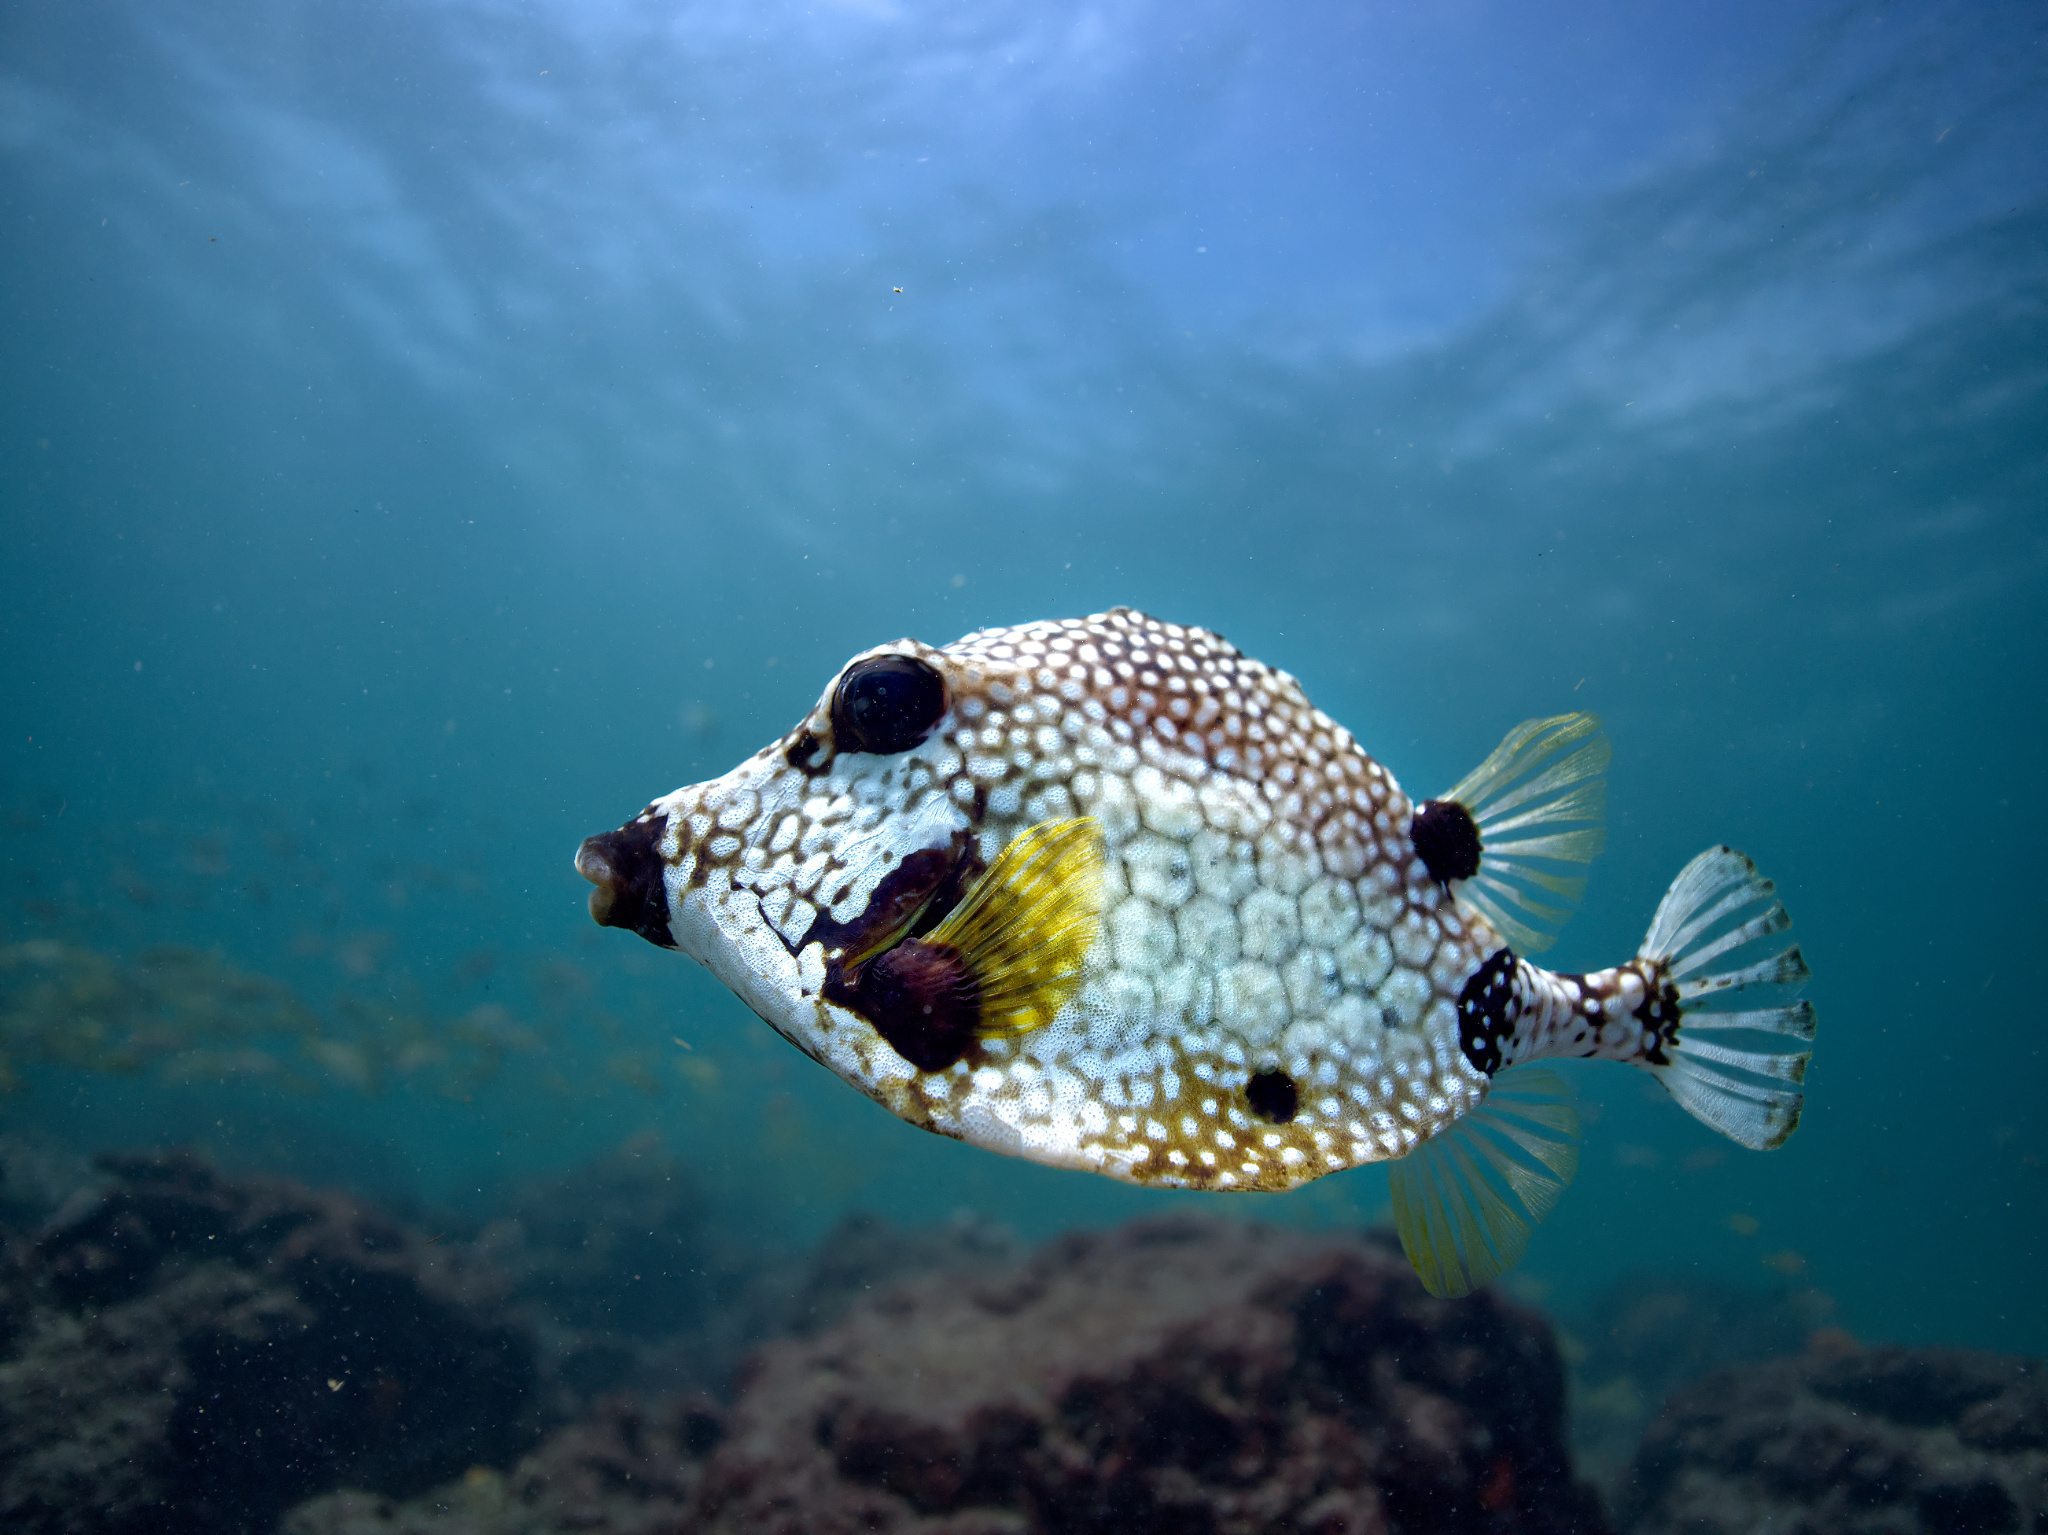 I. Introduction to Post-Processing Tips for Underwater Photos